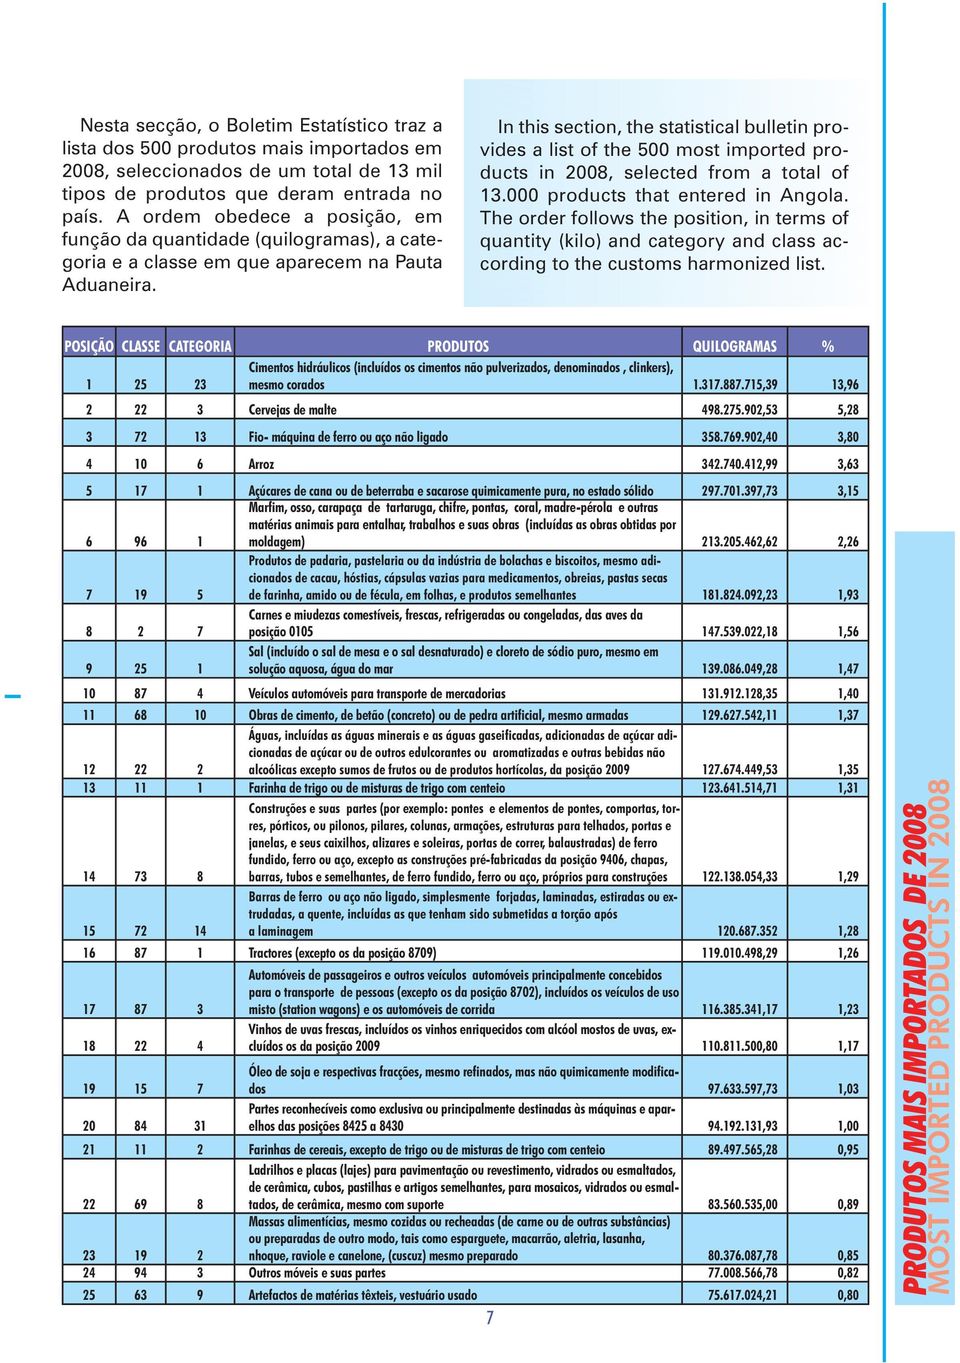 In this section, the statistical bulletin provides a list of the 500 most imported products in 2008, selected from a total of 13.000 products that entered in Angola.